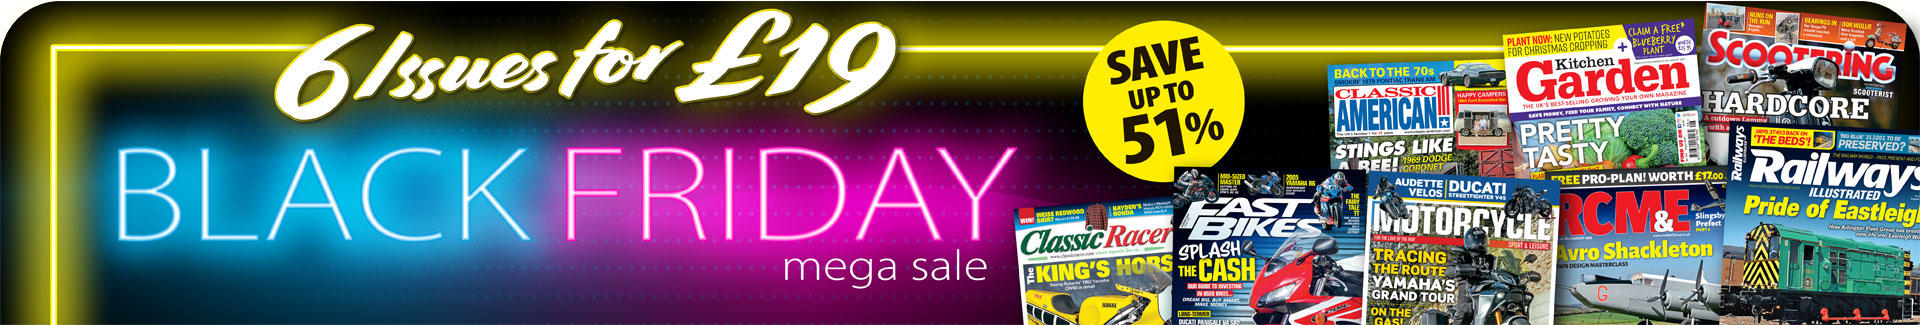 Great Black Friday Magazine Subscription offers - save up to 51%